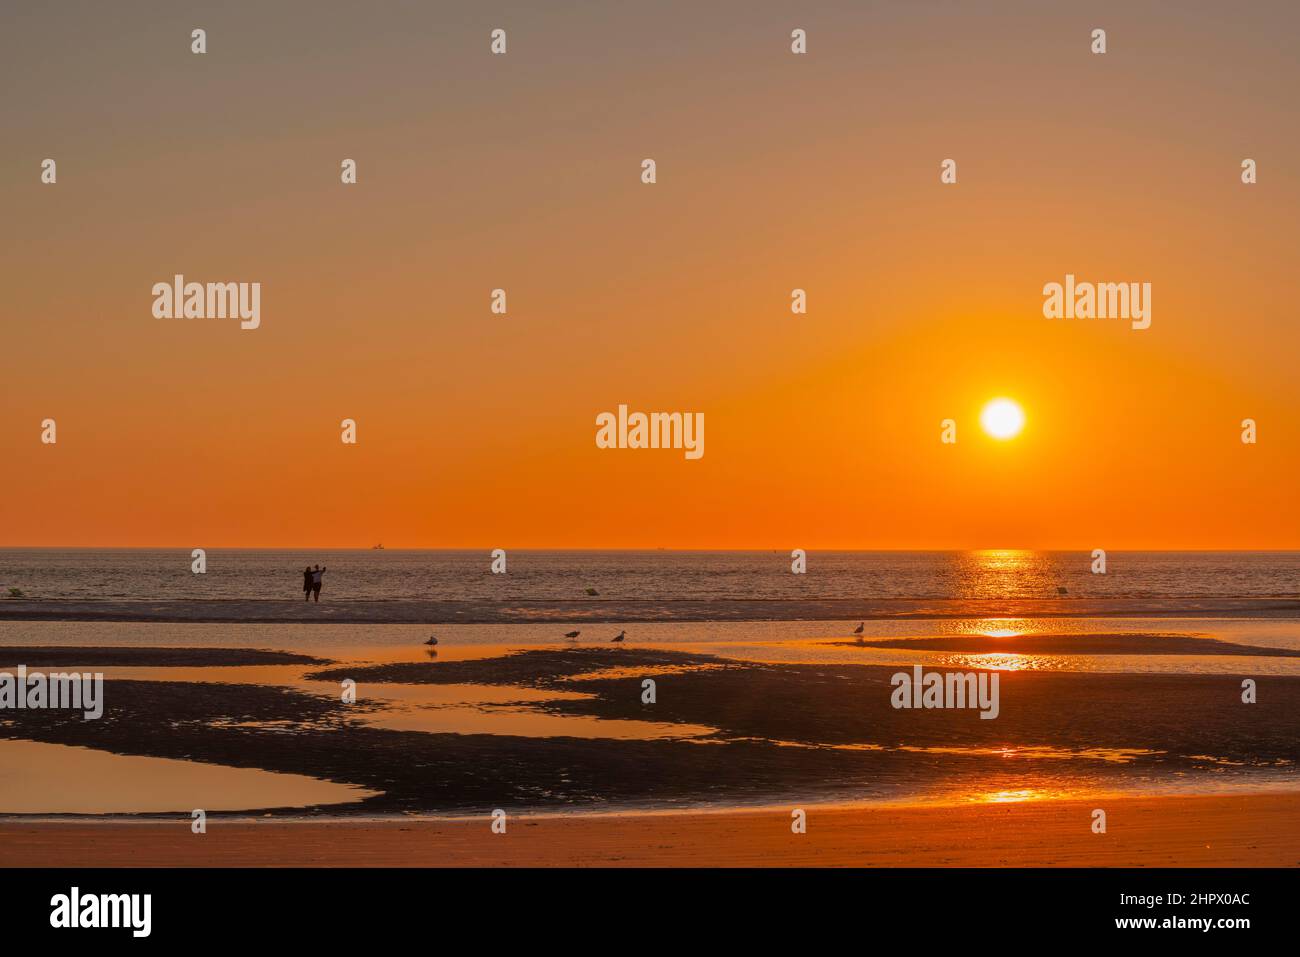 Sunset by the sea, St. -Peter-Ording, North Sea, Schleswig-Holstein, Germany Stock Photo